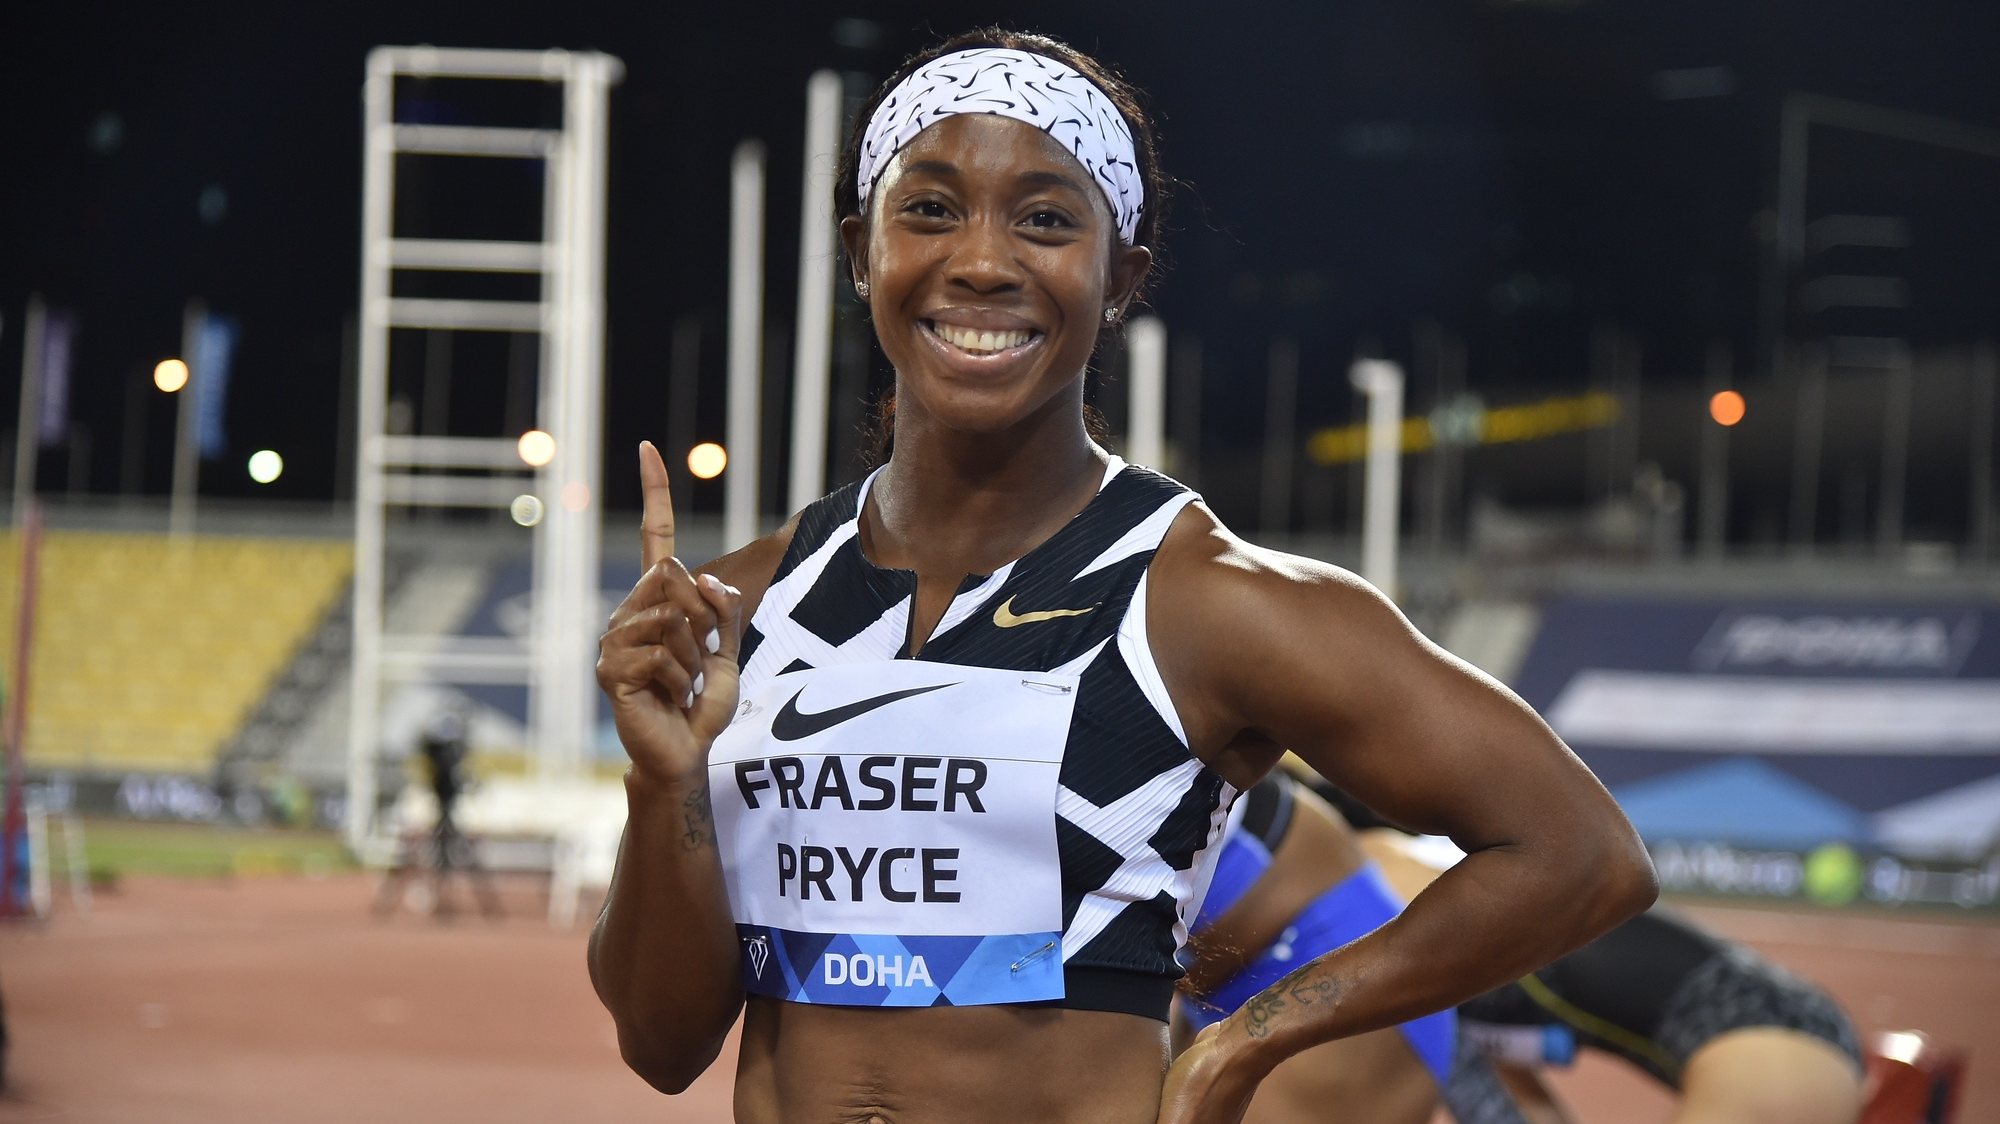 epa09234301 Shelly-Ann Fraser-Pryce of Jamaica celebrates after the 100m Women final race at the Doha Diamond League athletics meeting at Qatar Sports Club in Doha, Qatar, 28 May 2021.  EPA/Noushad Thekkayil